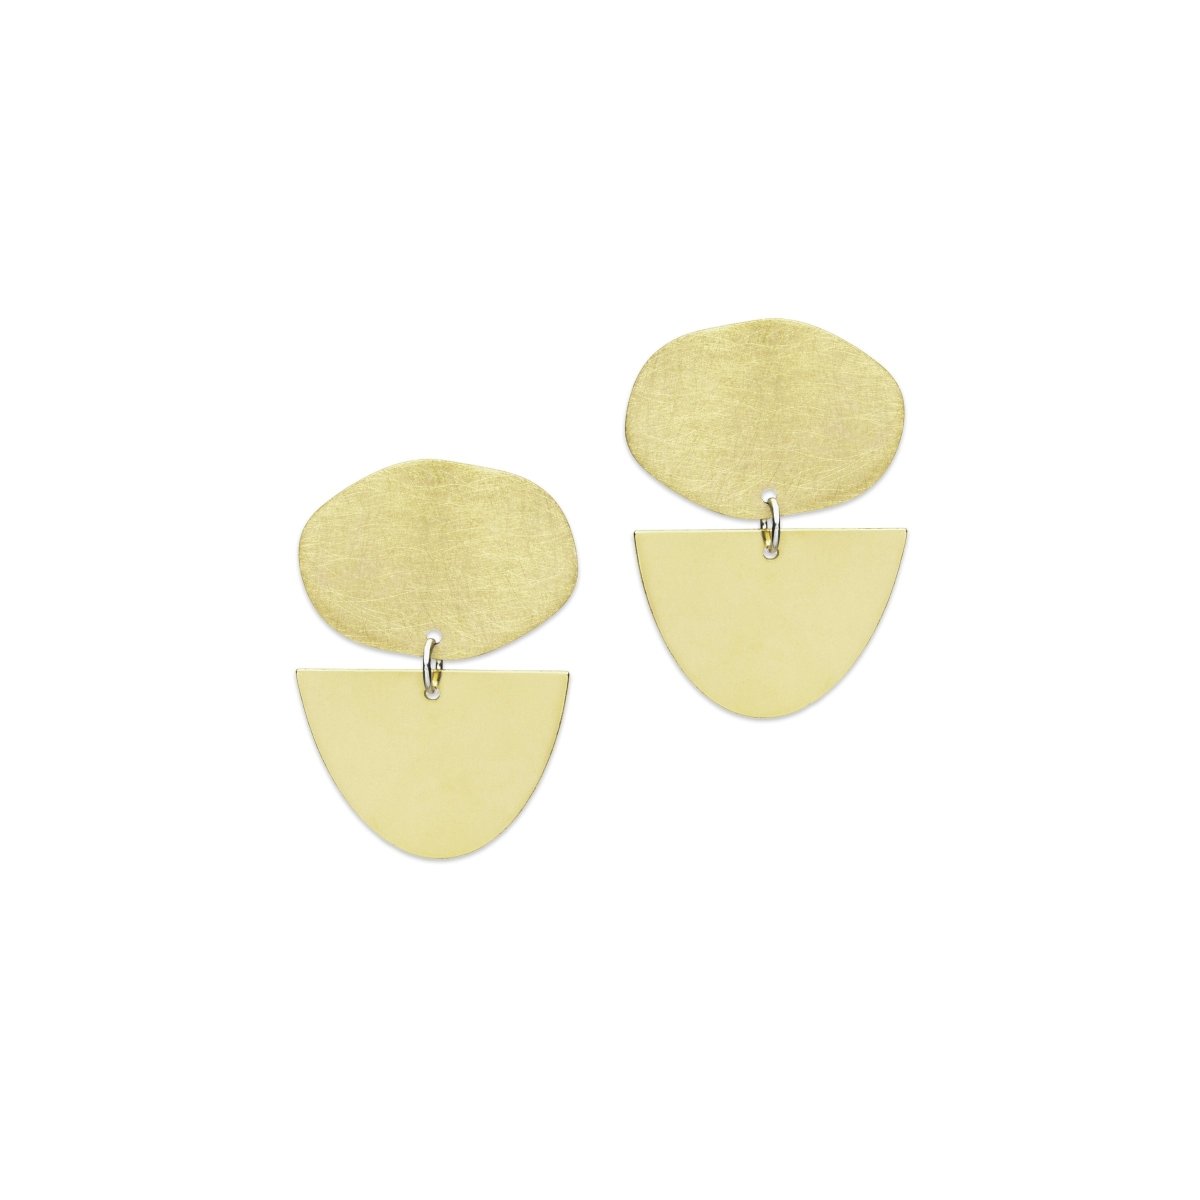 Ensem earrings in brush-finished and polished brass. Designed and handcrafted in Portland, Oregon. 